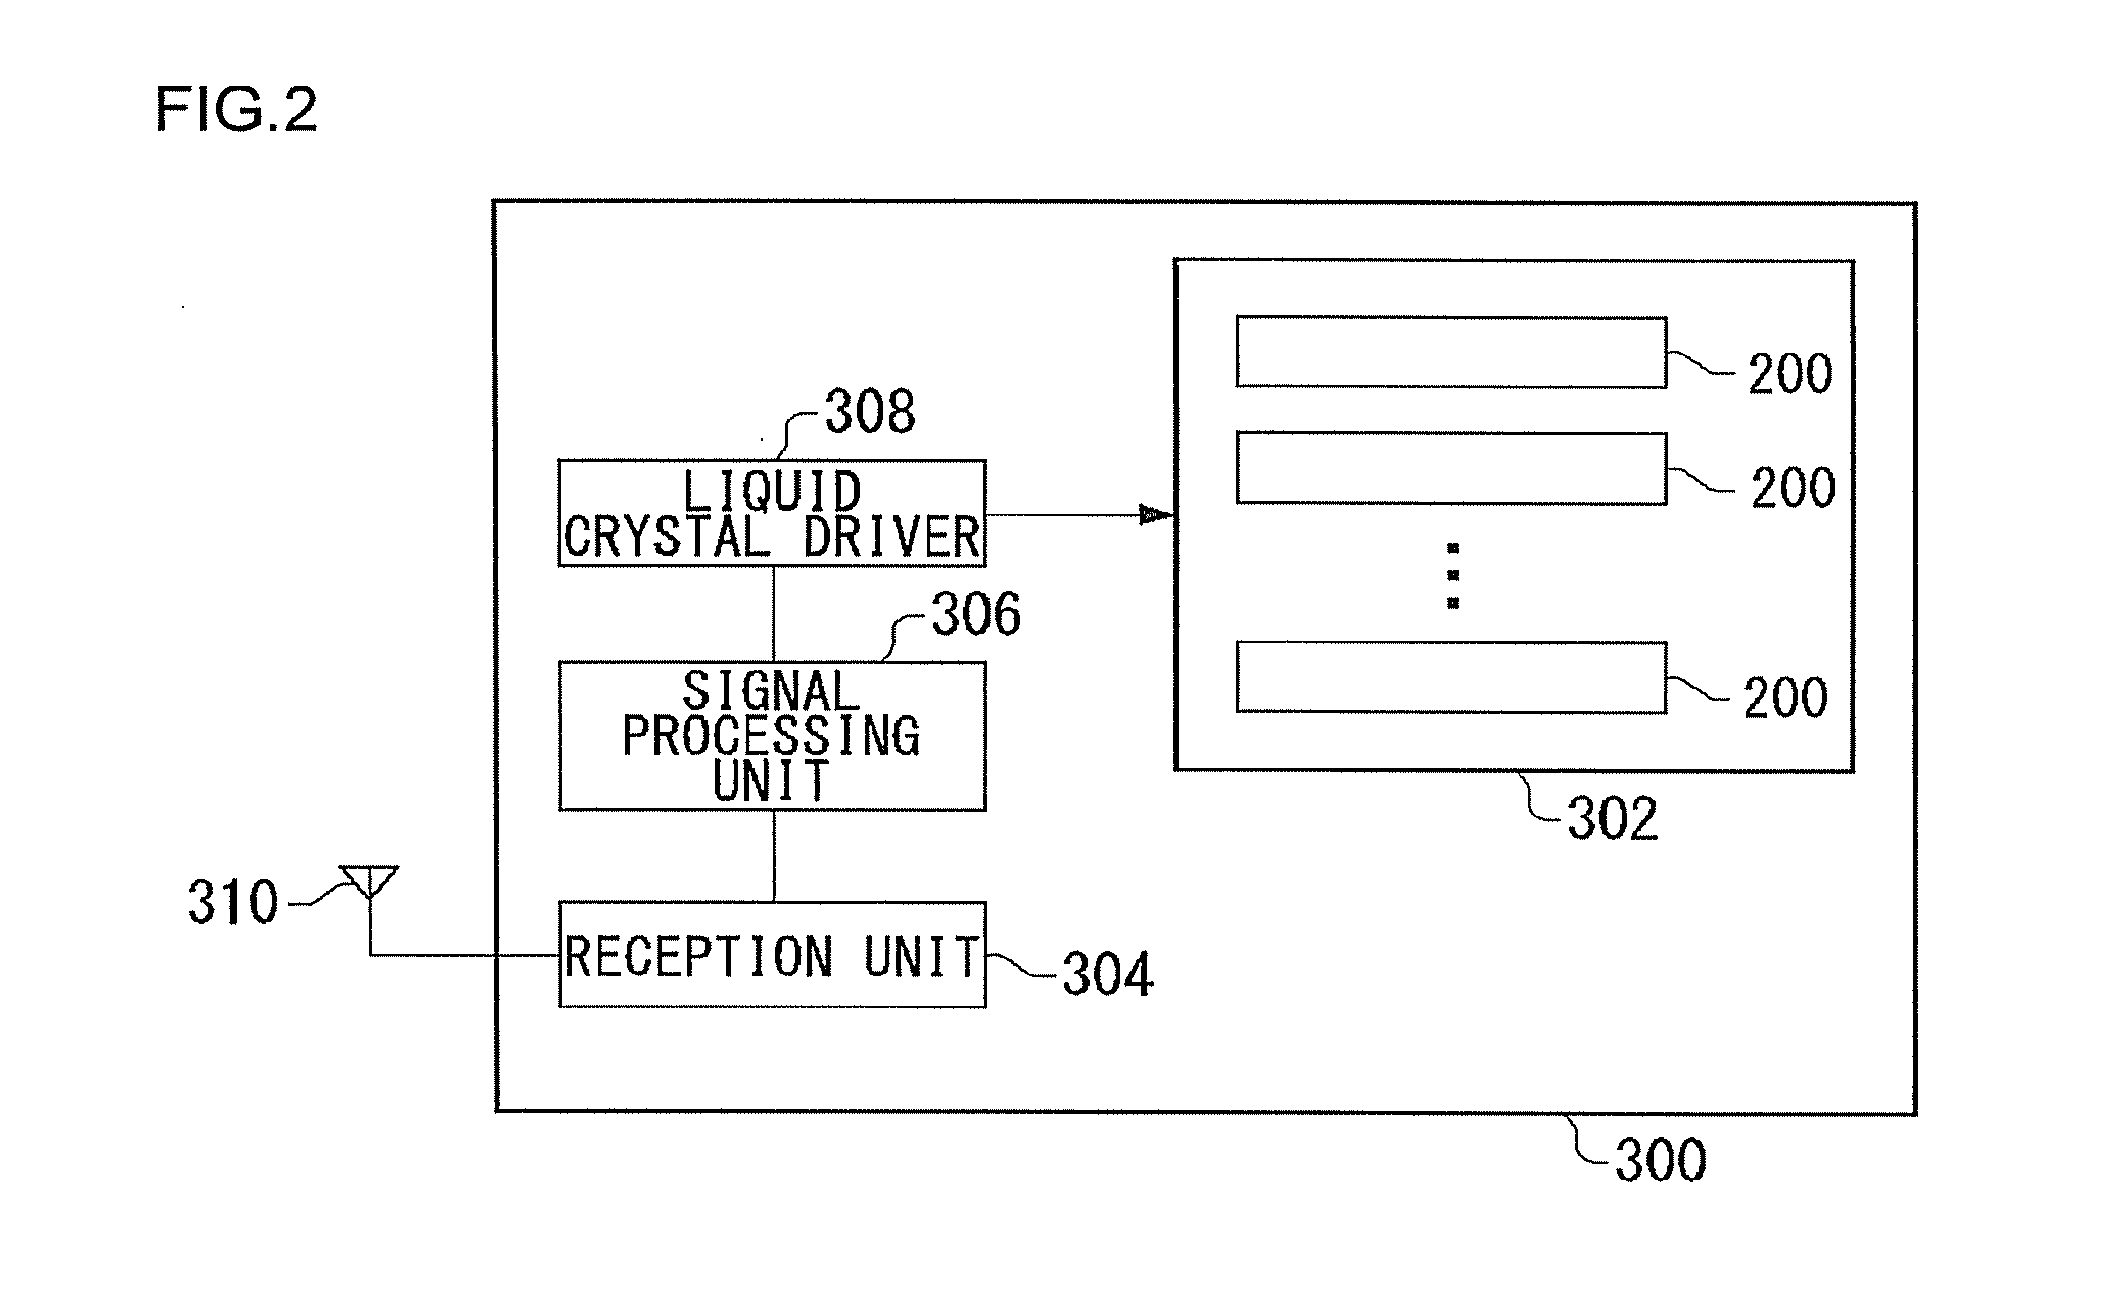 Control circuit for light-emitting element